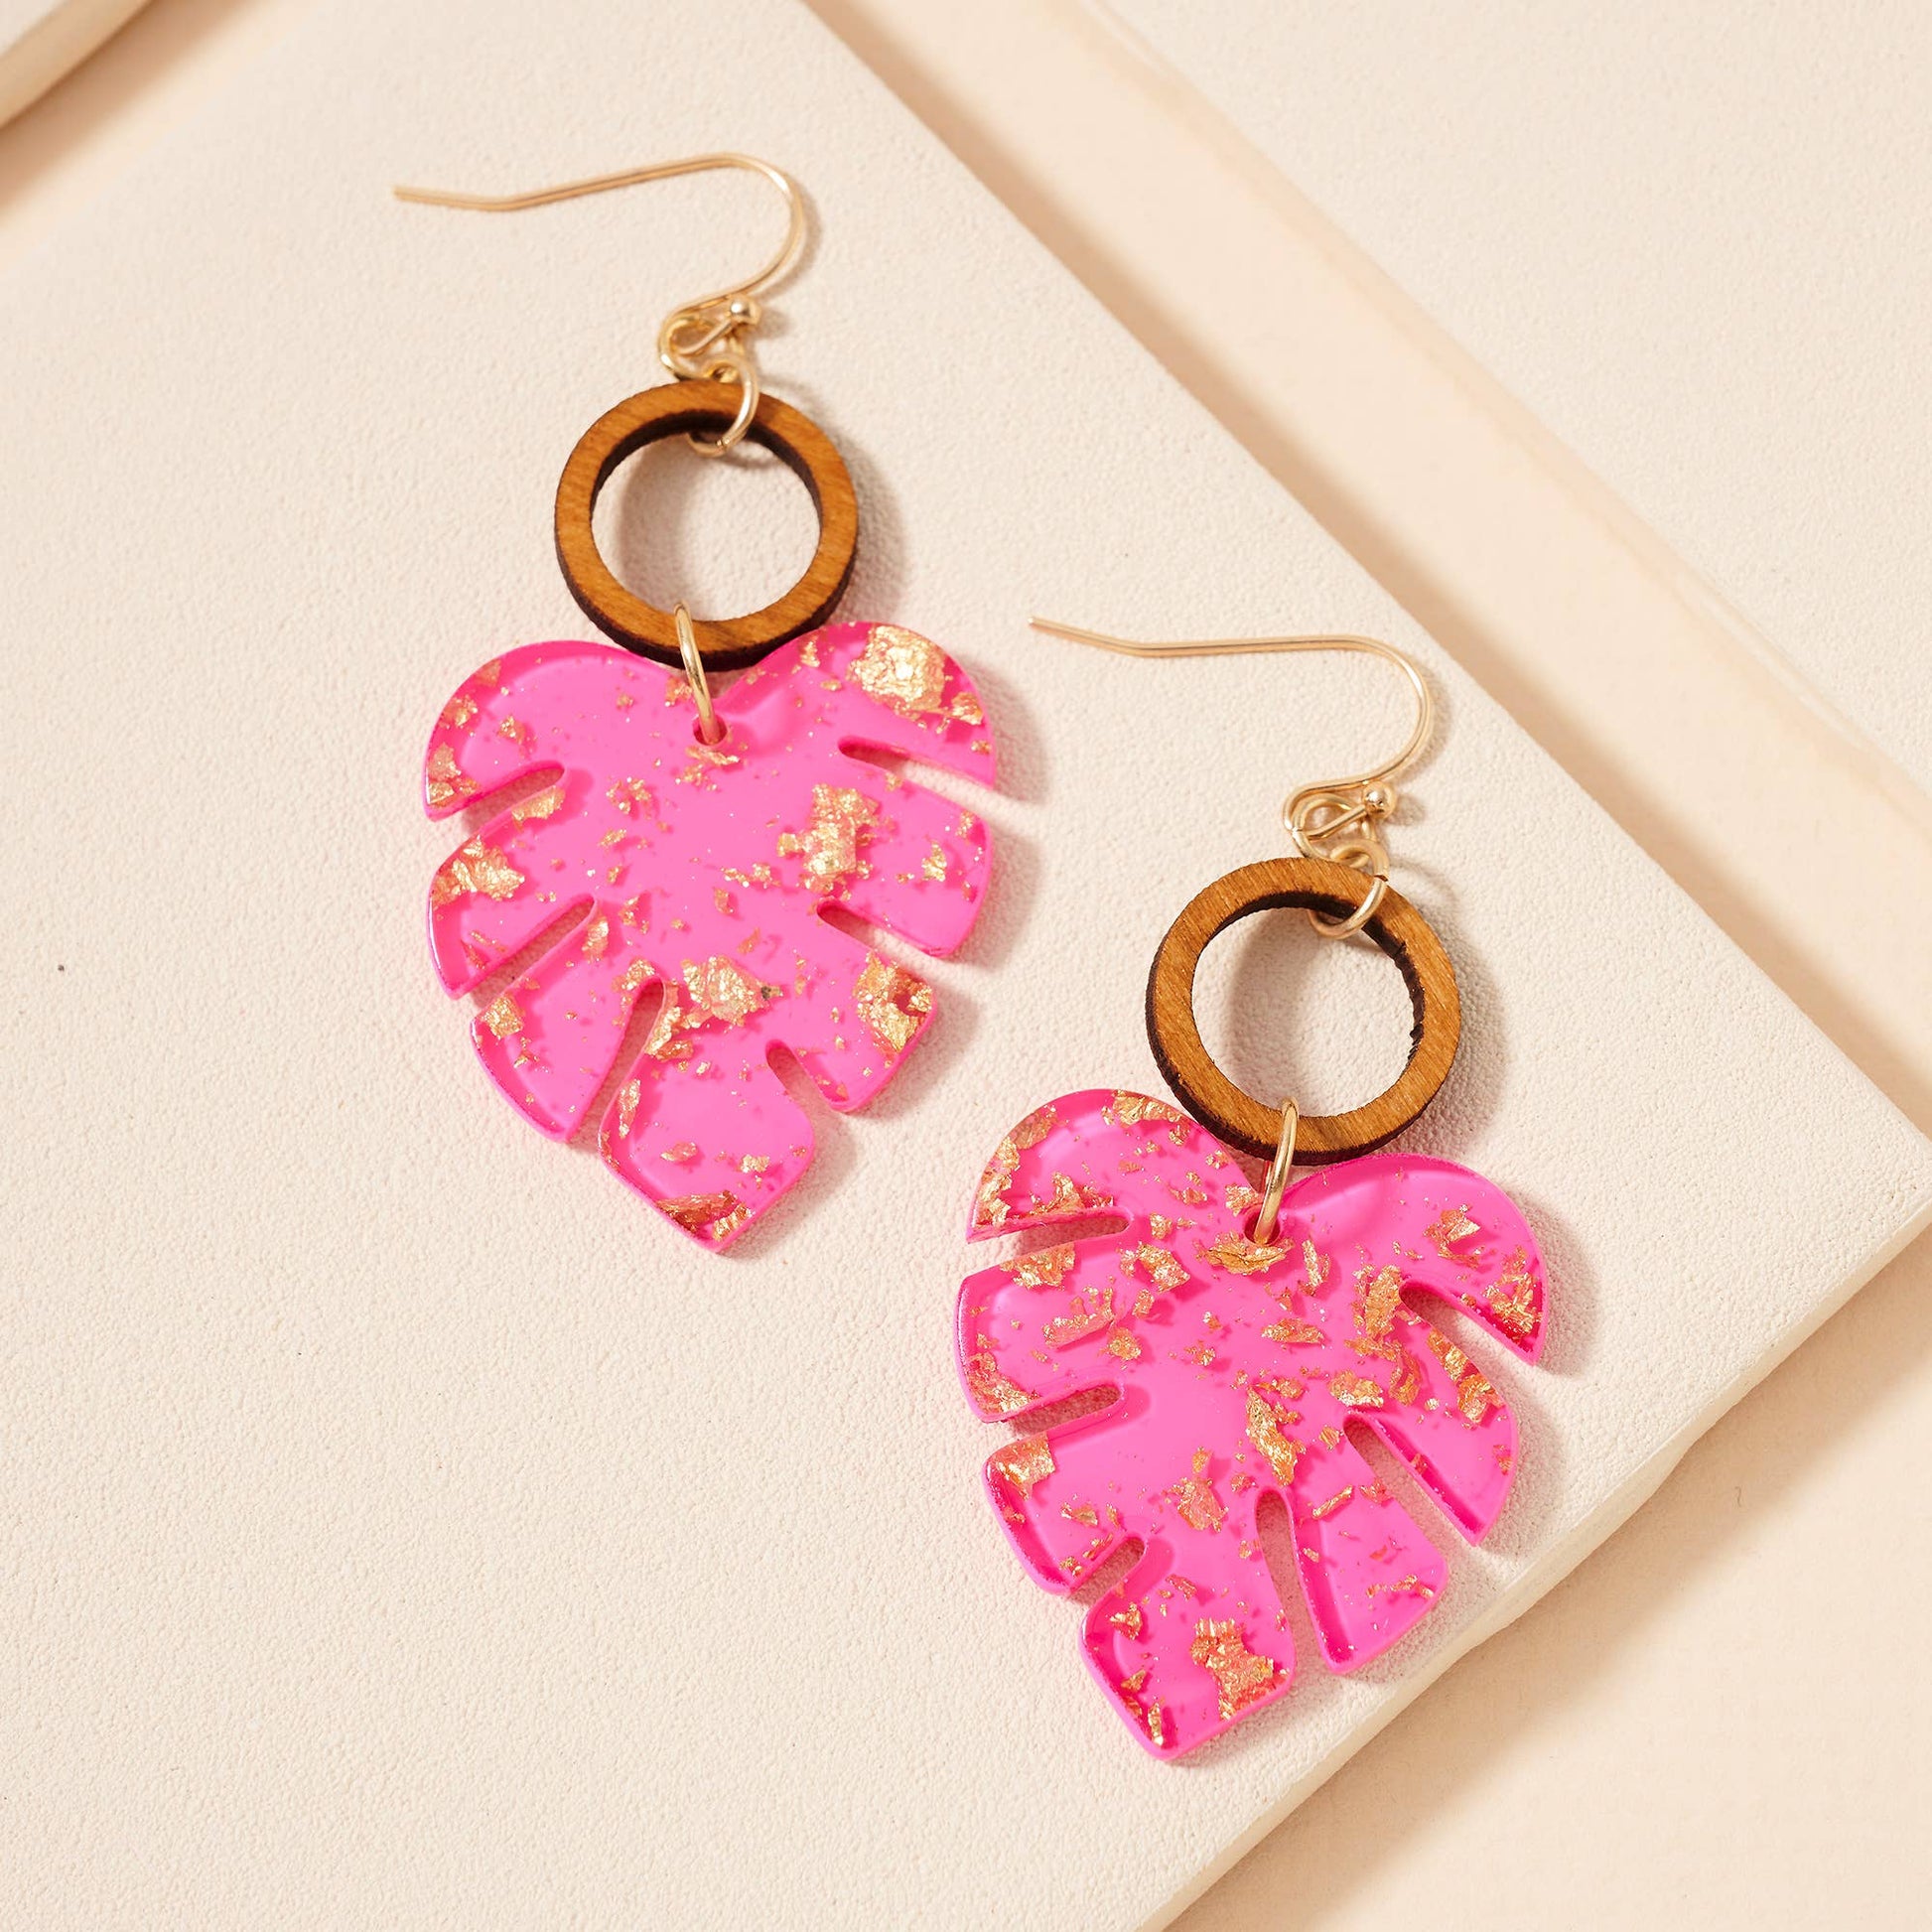 Shop our monstera earrings at miaava.com!